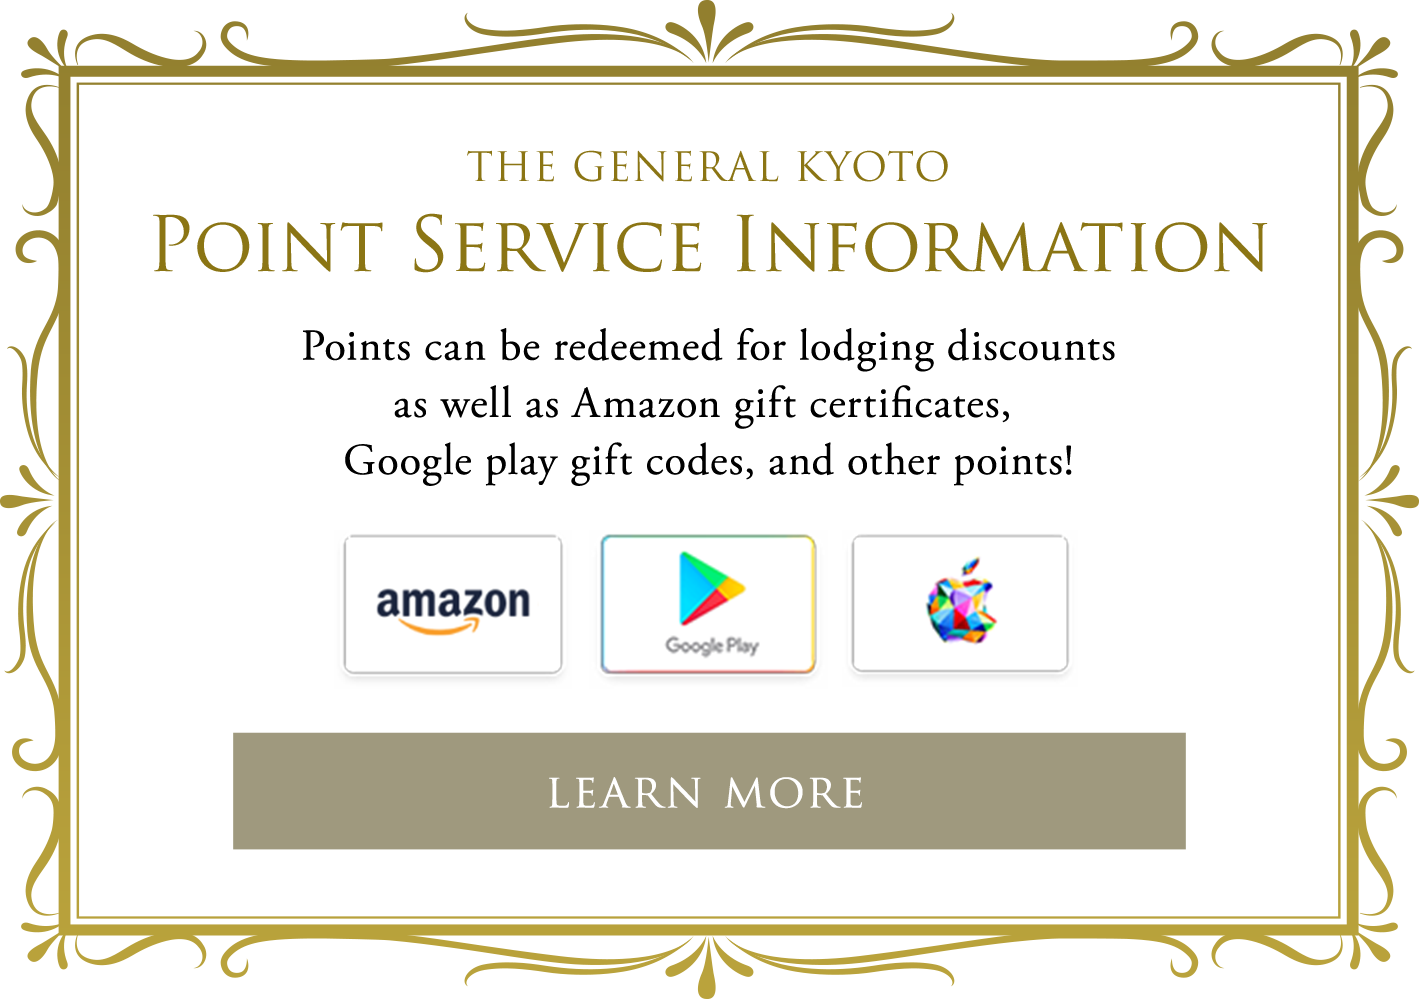 POINT SERVICE INFORMATION LEARN MORE